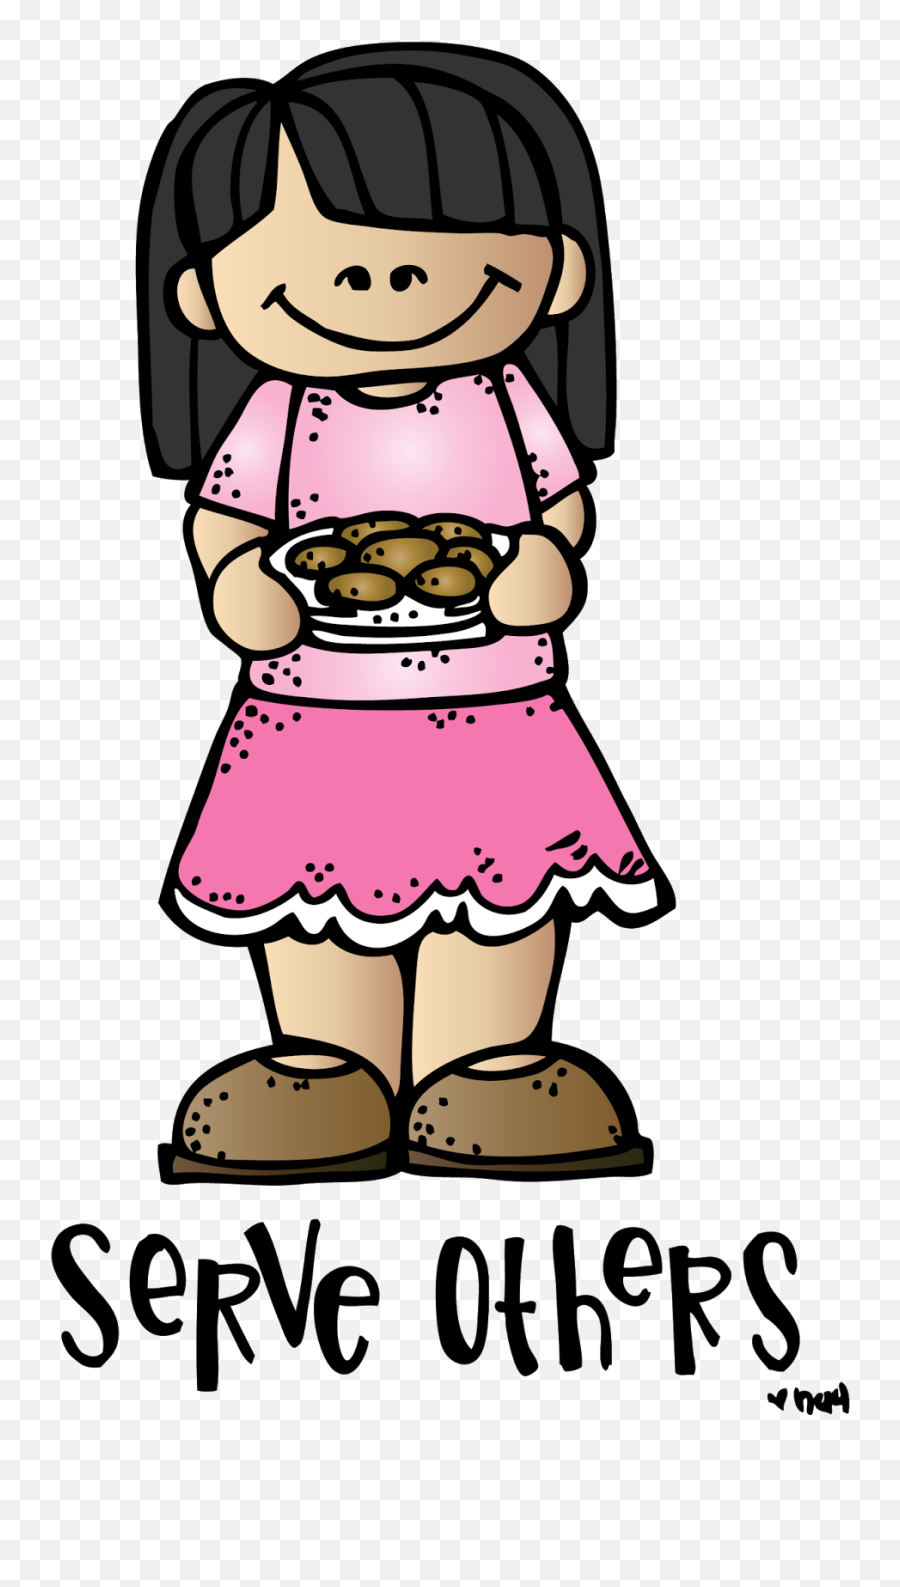 A Girl With A Cake In Her Hands - Serve Others Clipart Emoji,Helping Others Clipart